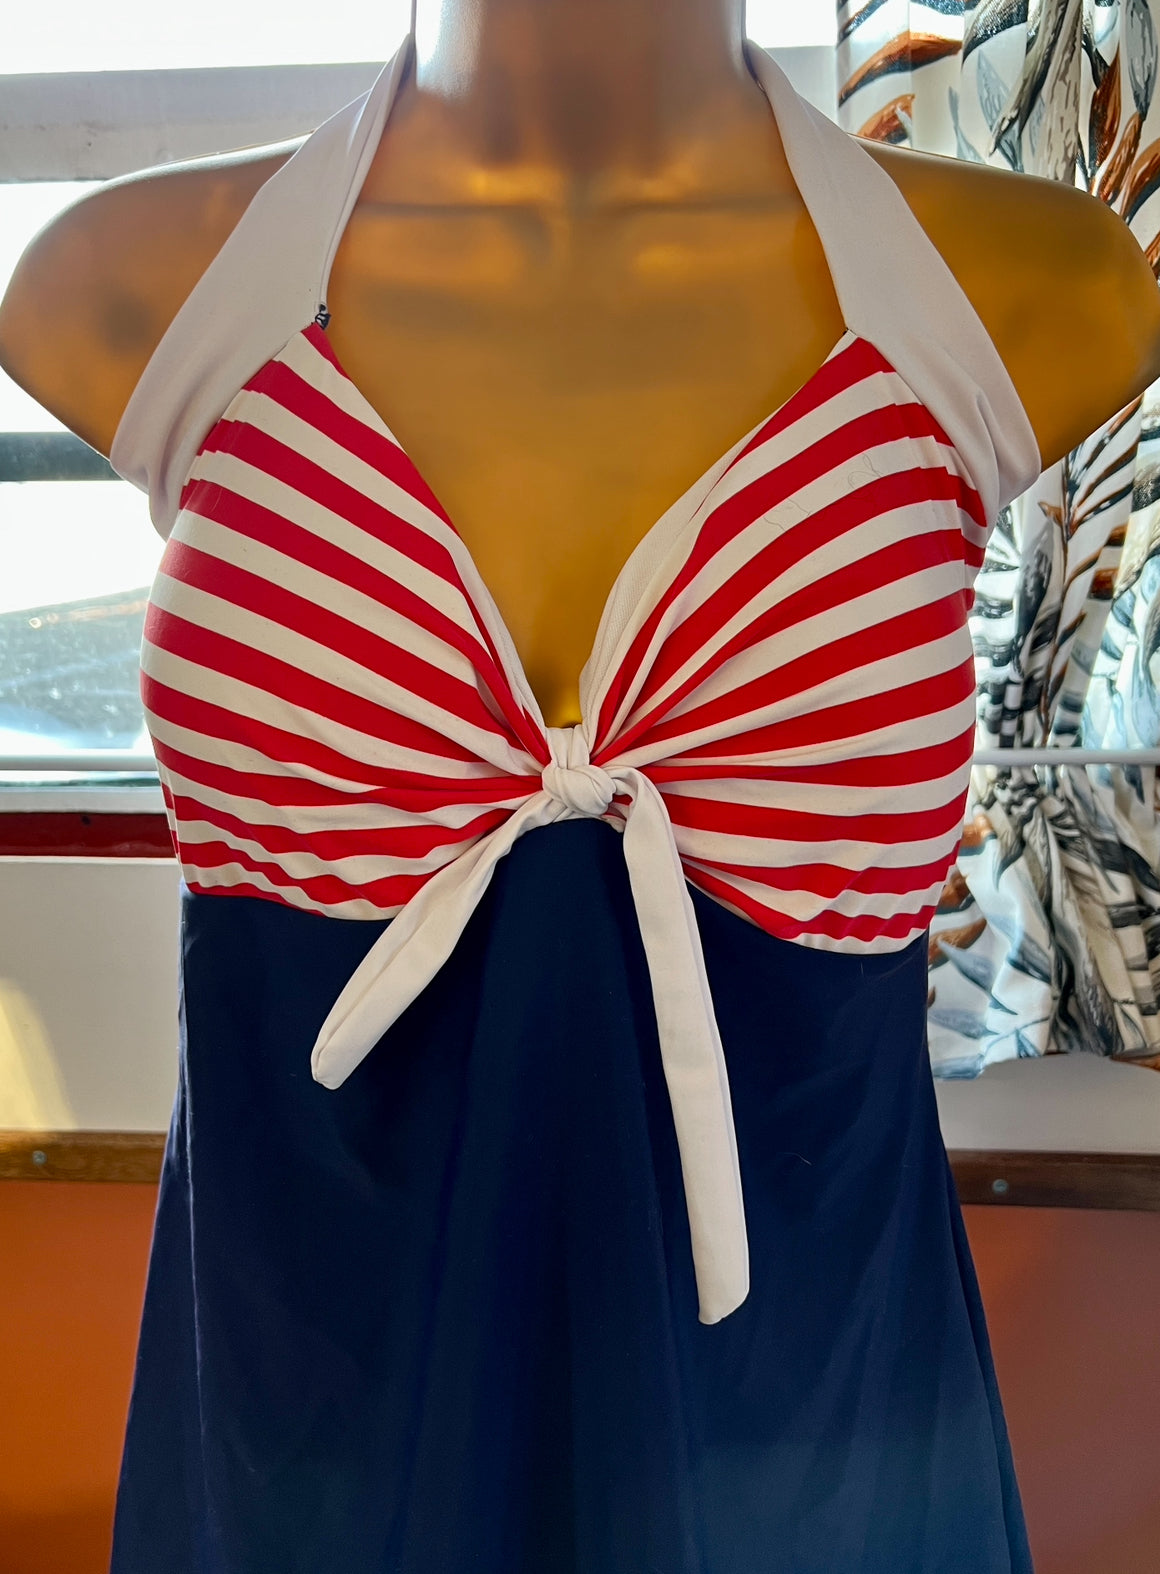 Vintage 50s style sailor skirted pinup swimsuit 2XL